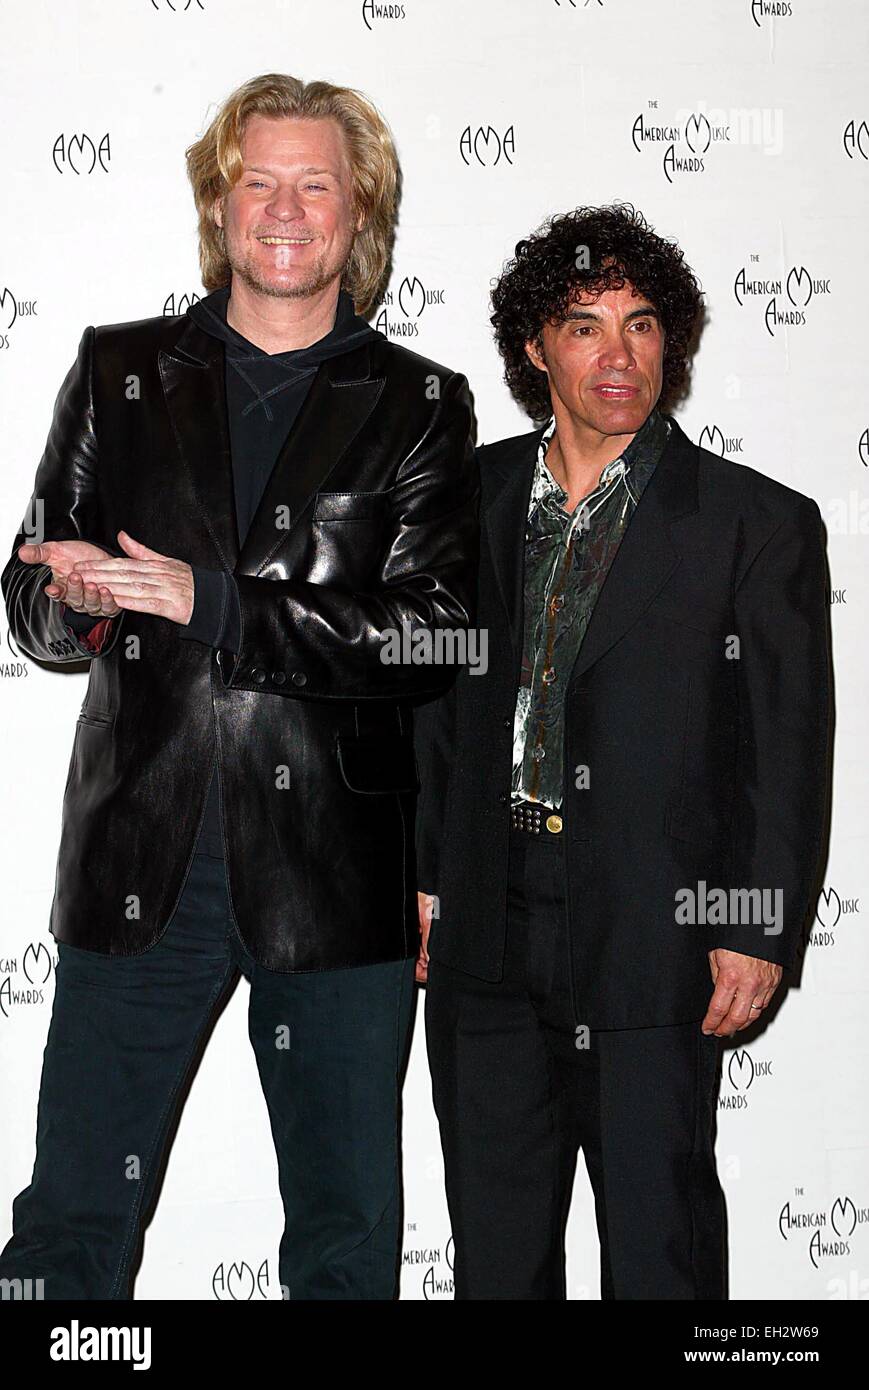 File. 5th Mar, 2015. DARRYL HALL and JOHN OATES of 'Hall & Oates' are suing a Brooklyn-based granola company, Early Bird, for dubbing one of their products, 'Haulin' Oats.' The name and mark Haulin' Oats is an obvious play upon Plaintiff's well-known Hall & Oates mark, and was selected by defendant in an effort to trade off of the fame and notoriety associated with the artist's and plaintiff's well-known marks. A spokesperson for the group reiterated this claim adding that group owns the registration for 'Haulin Oats.' Pictured - Jan. 13, 2003 - Los Angeles - Darryl Hall and John Oates at 30 Stock Photo